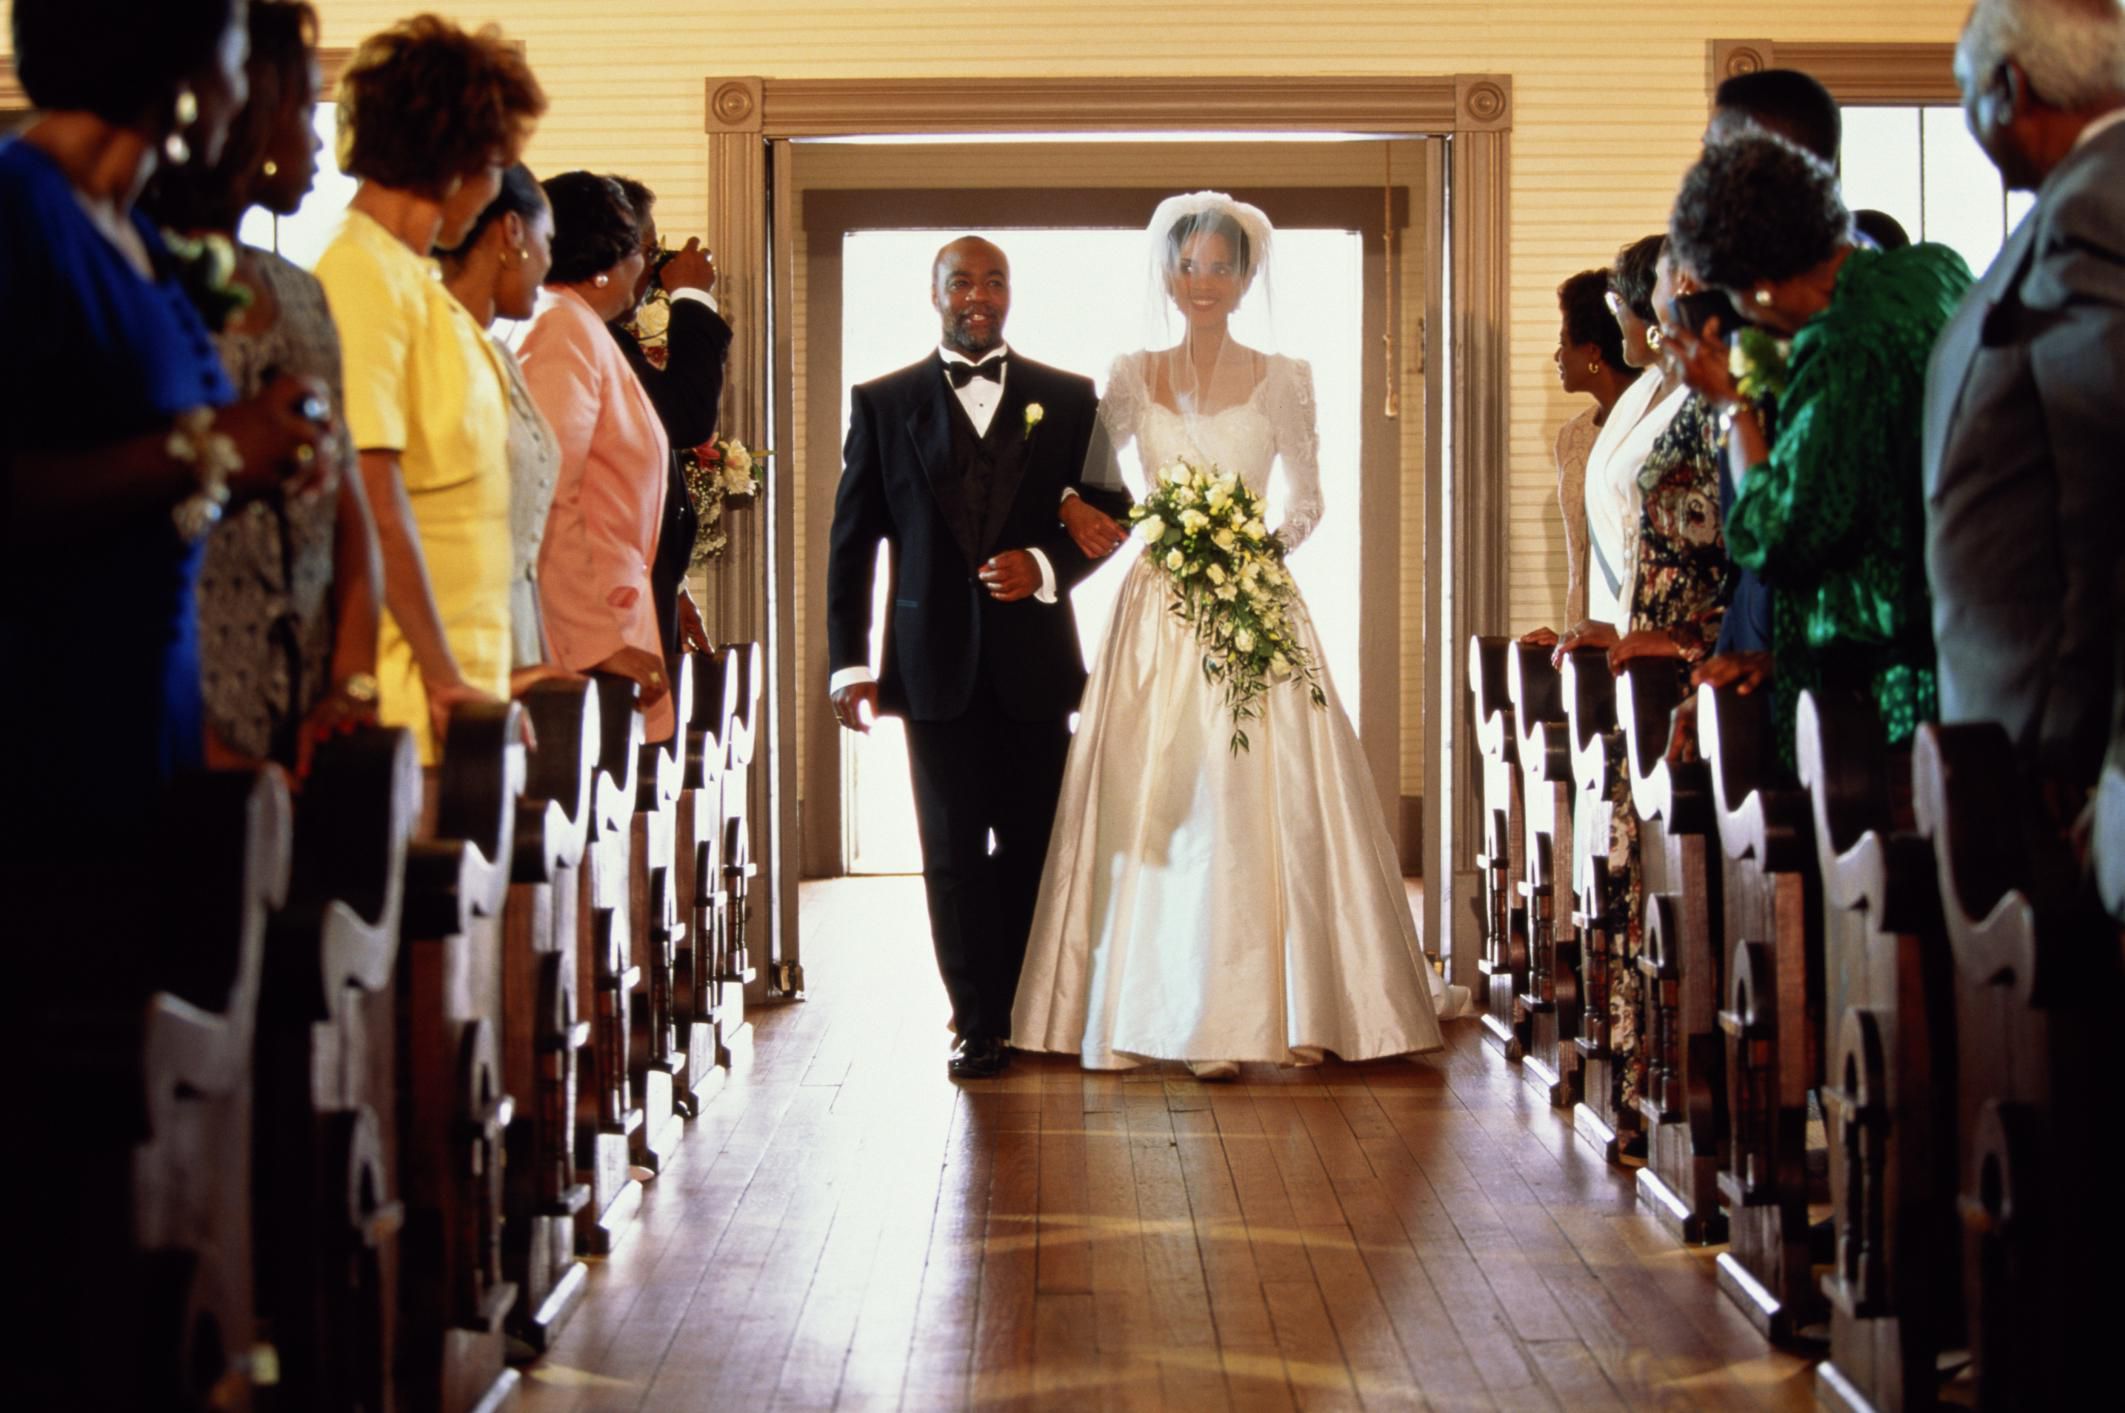 The Wedding Processional Order